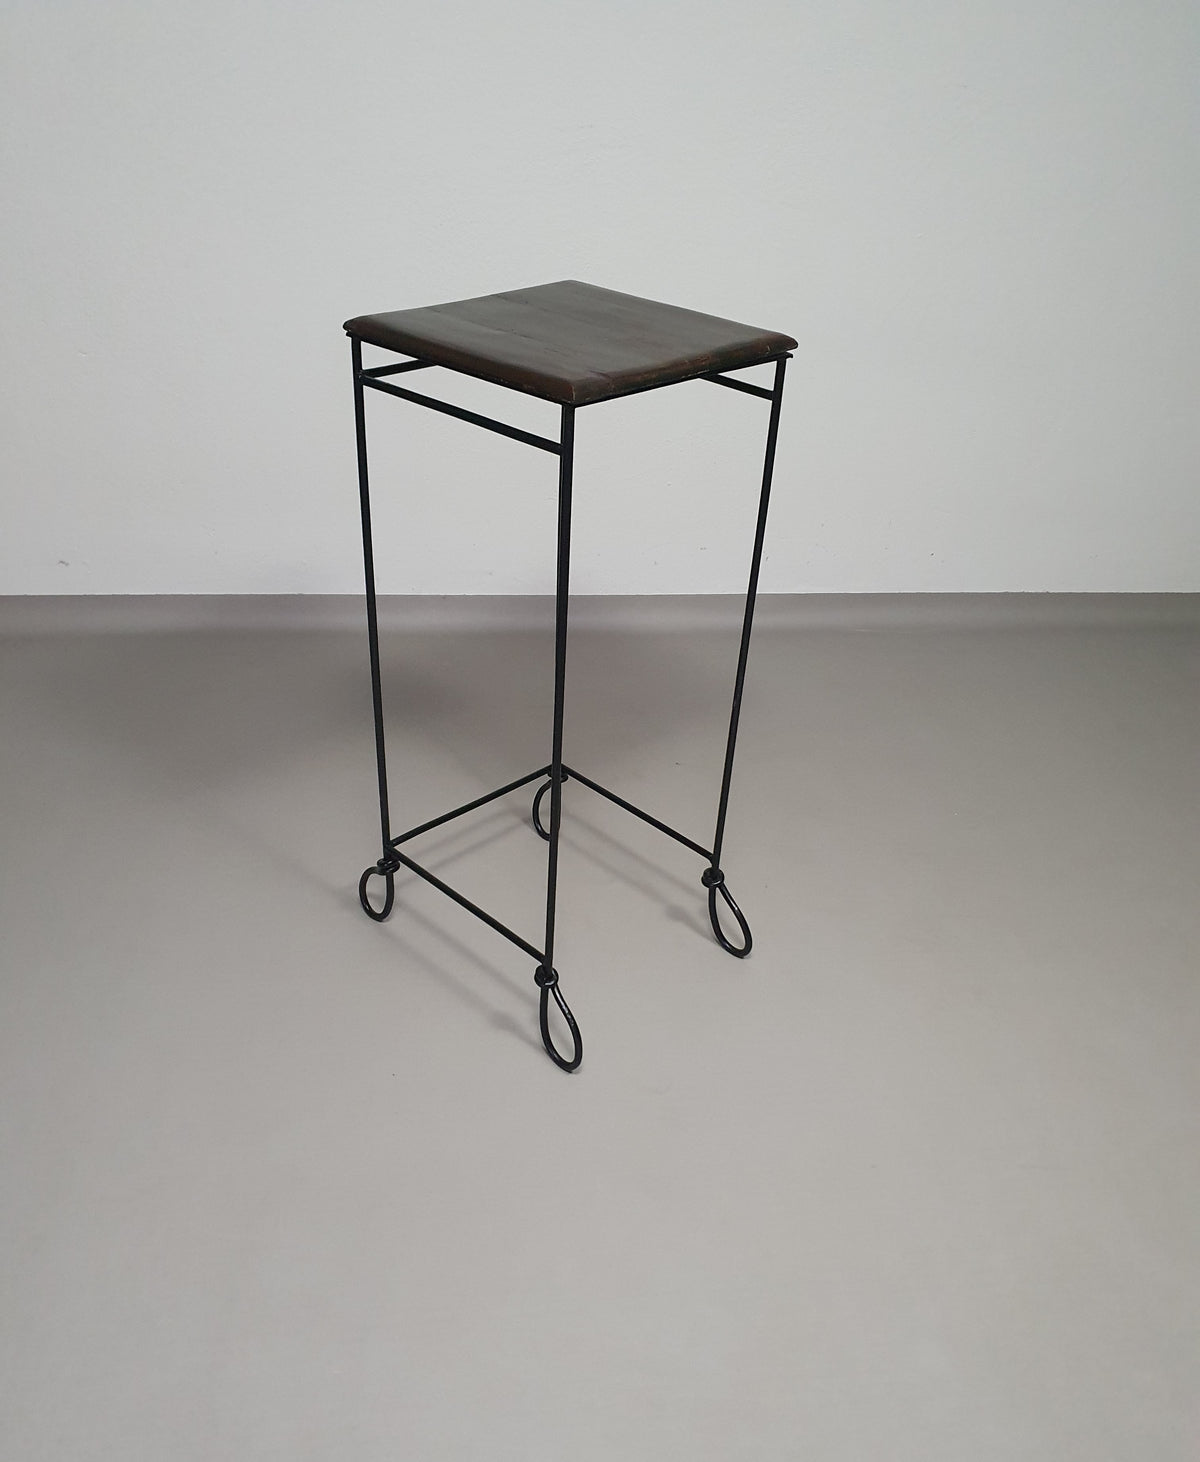 Wrought iron plant stand / side table